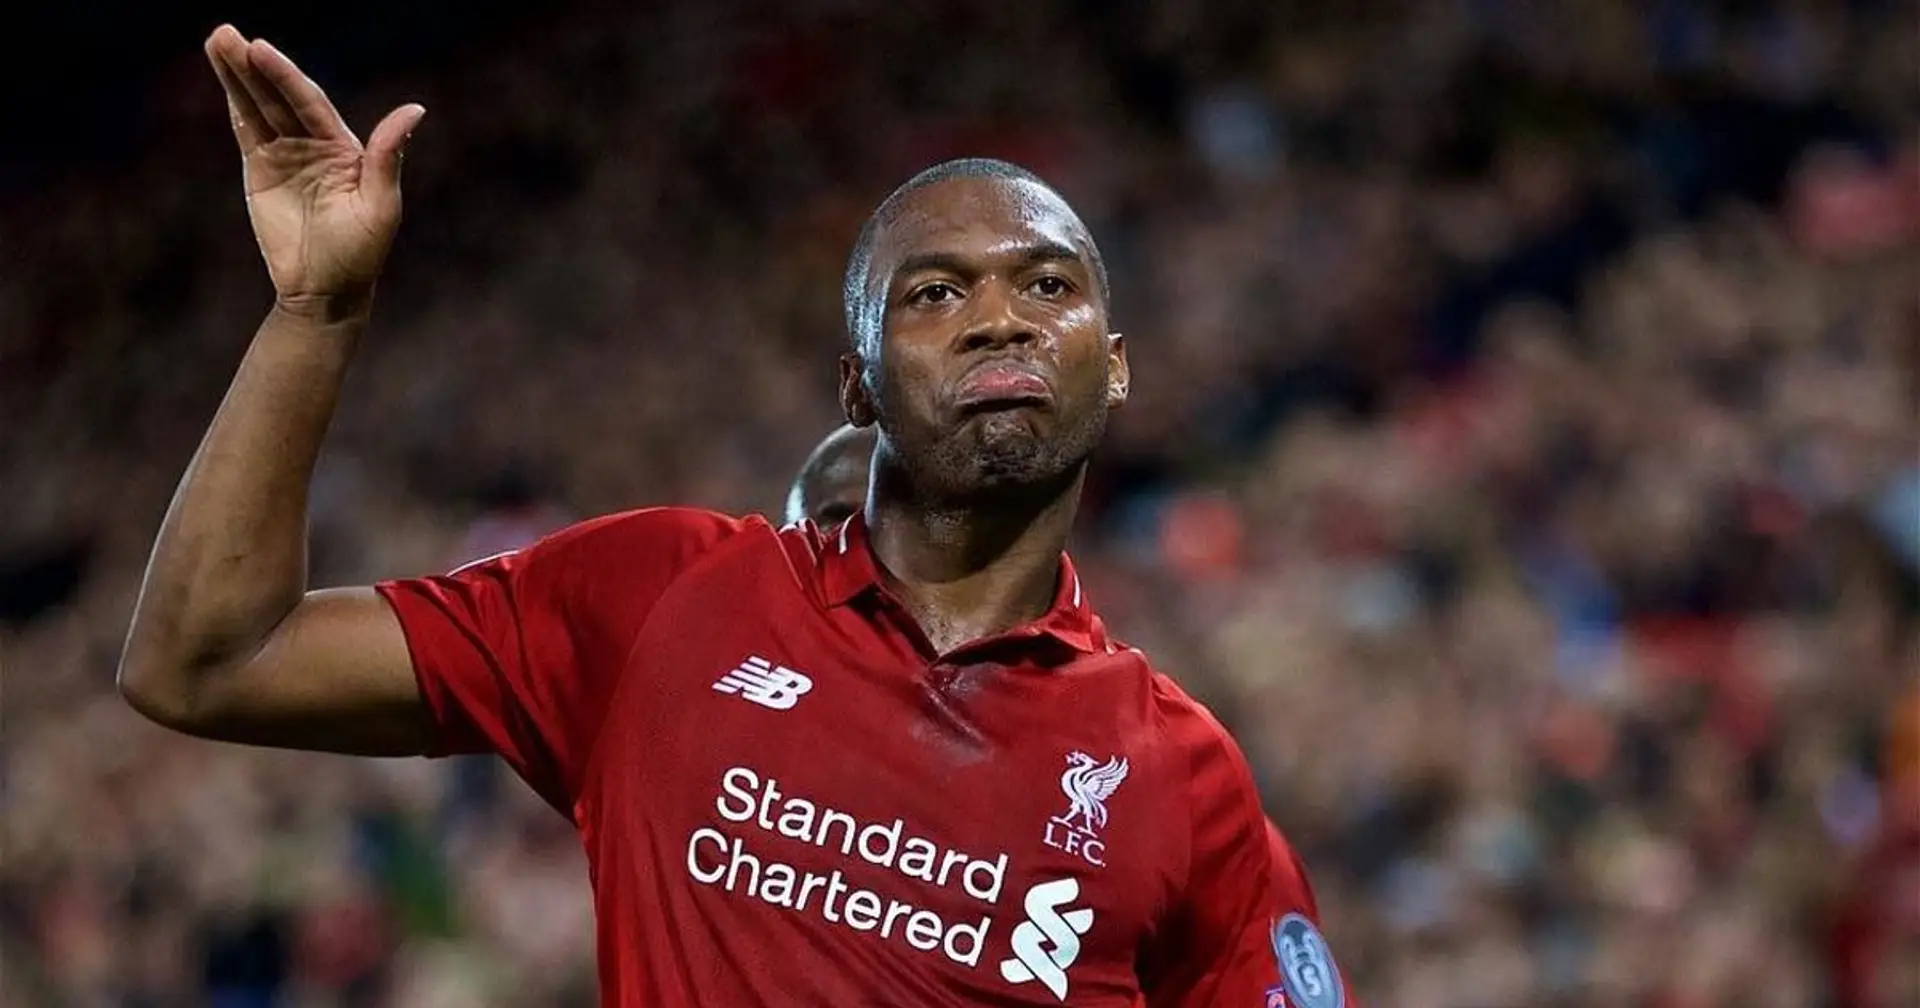 Daniel Sturridge offered chance to resurrect career as he attracts interest from 2 MLS clubs (reliability: 3 stars)